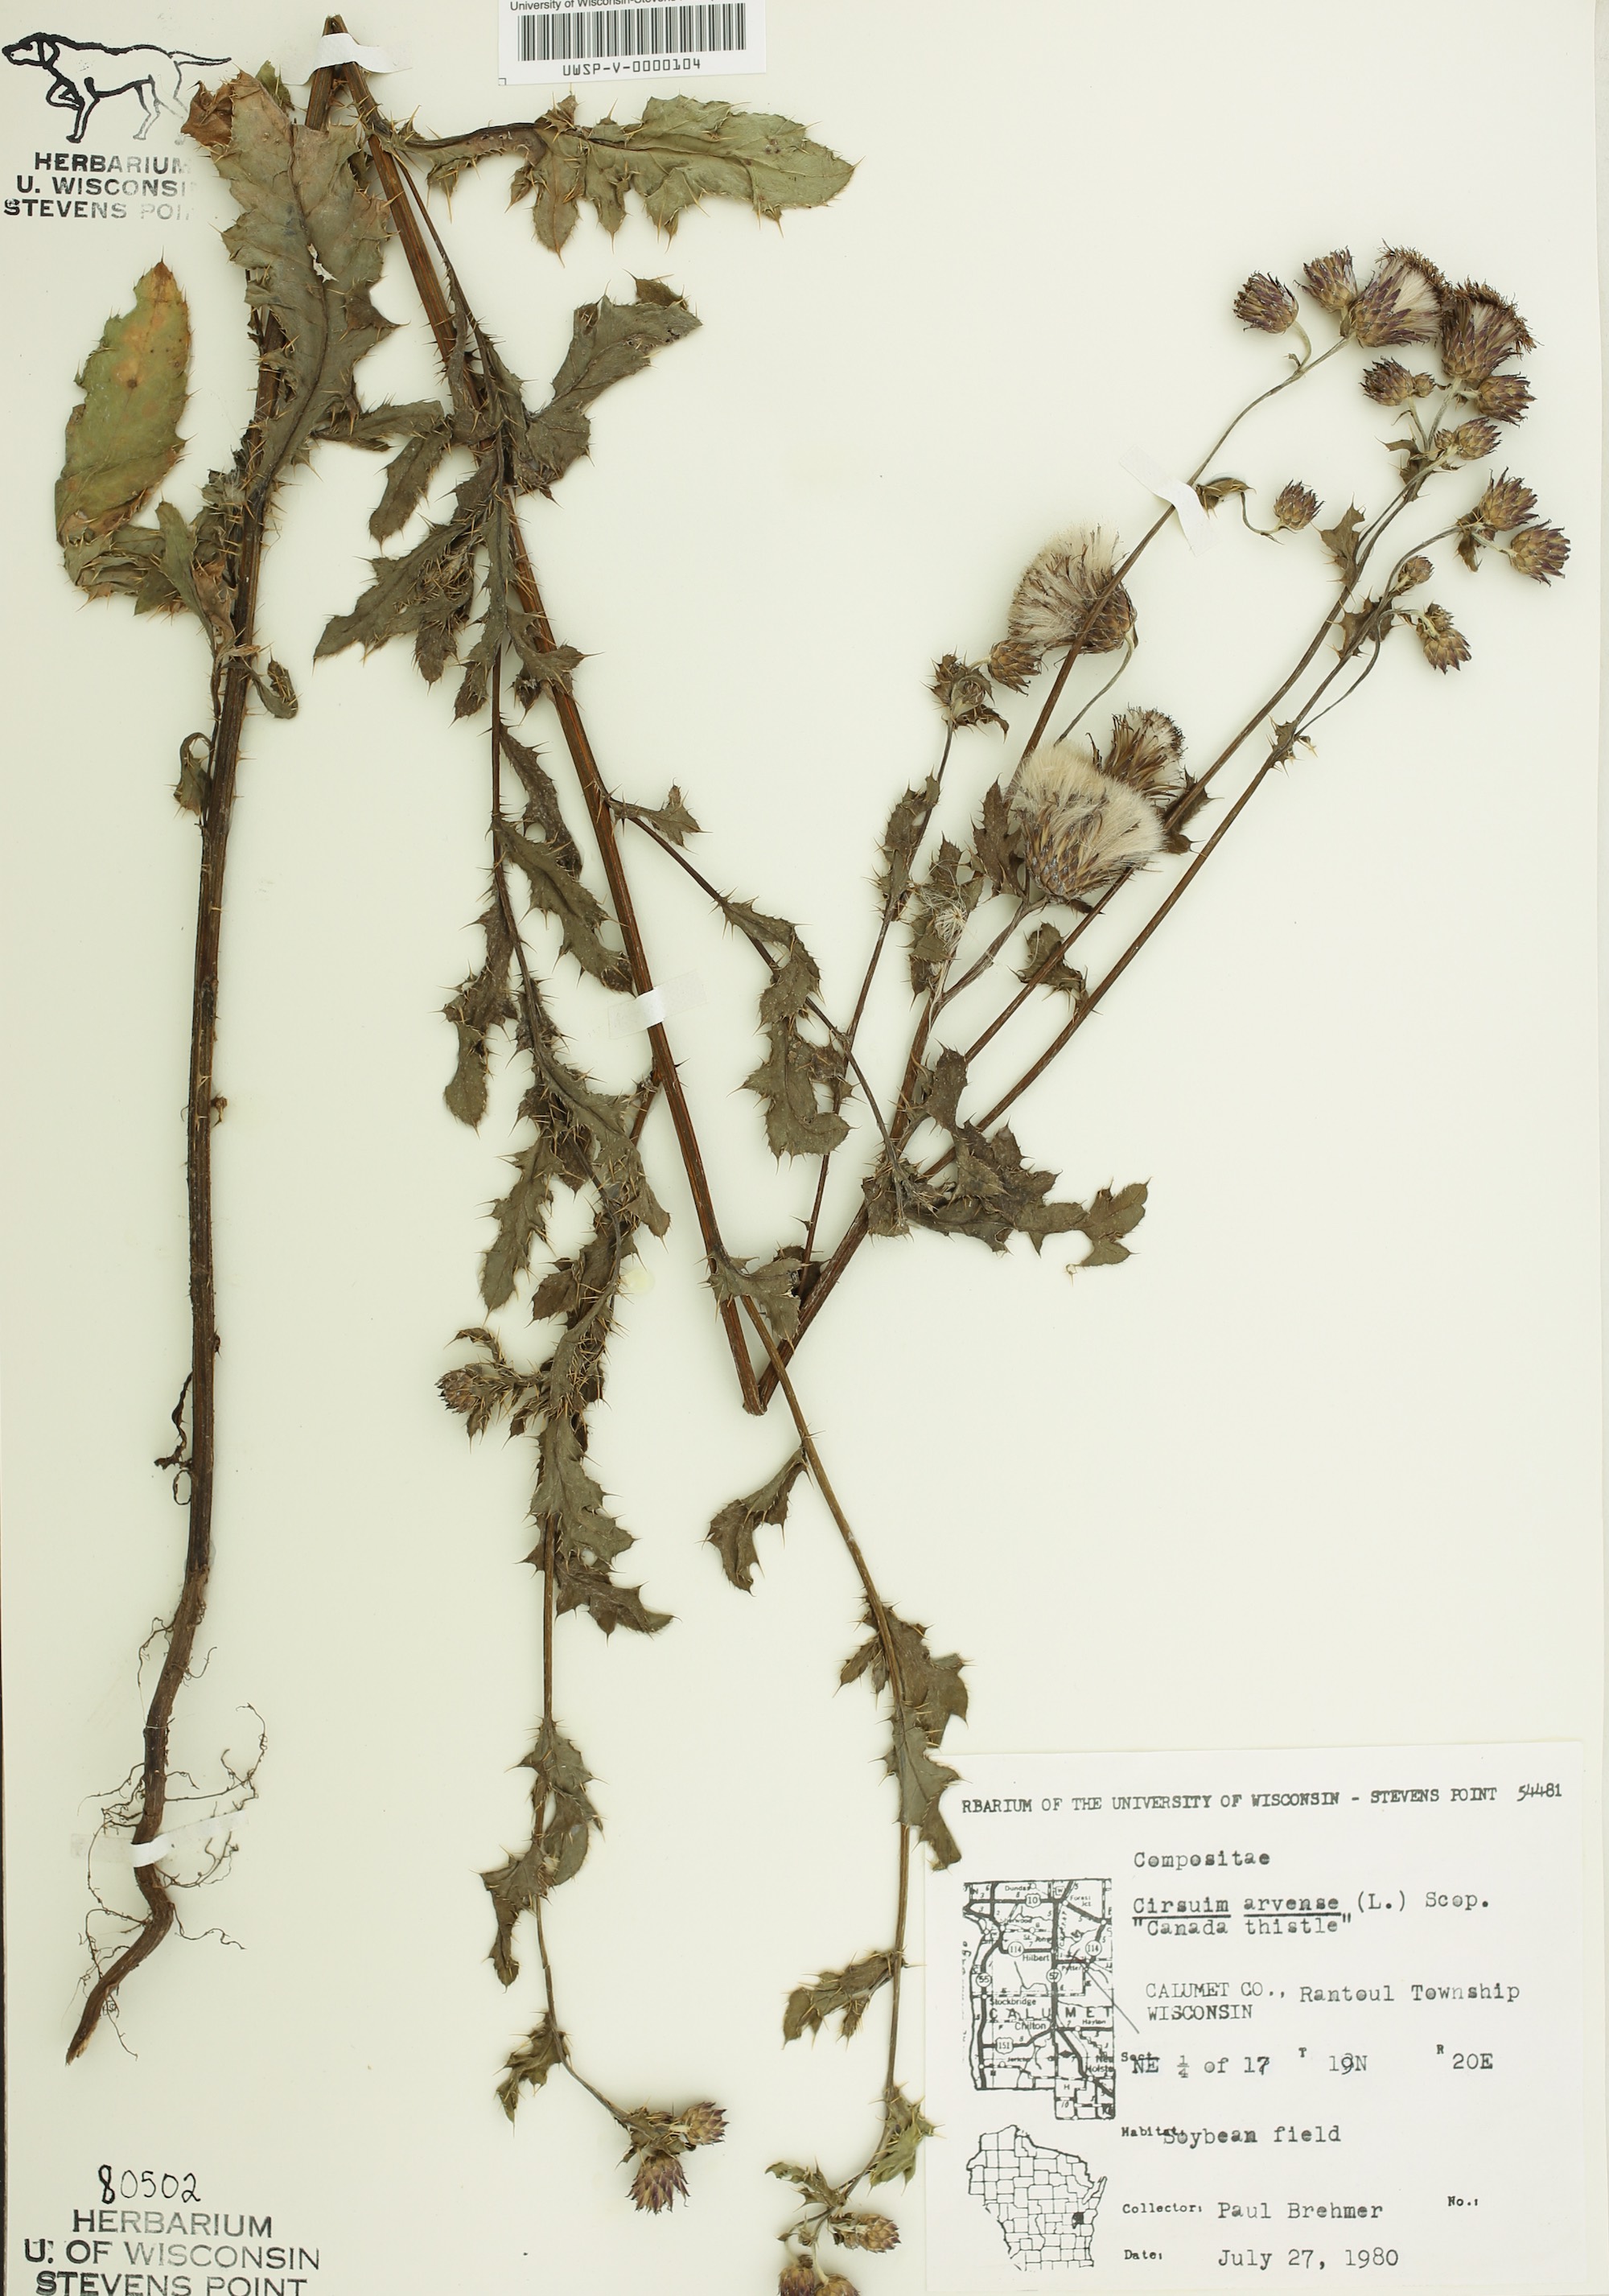 Canada Thistle specimen collected in Calumet County, Wisconsin on July 27, 1980.